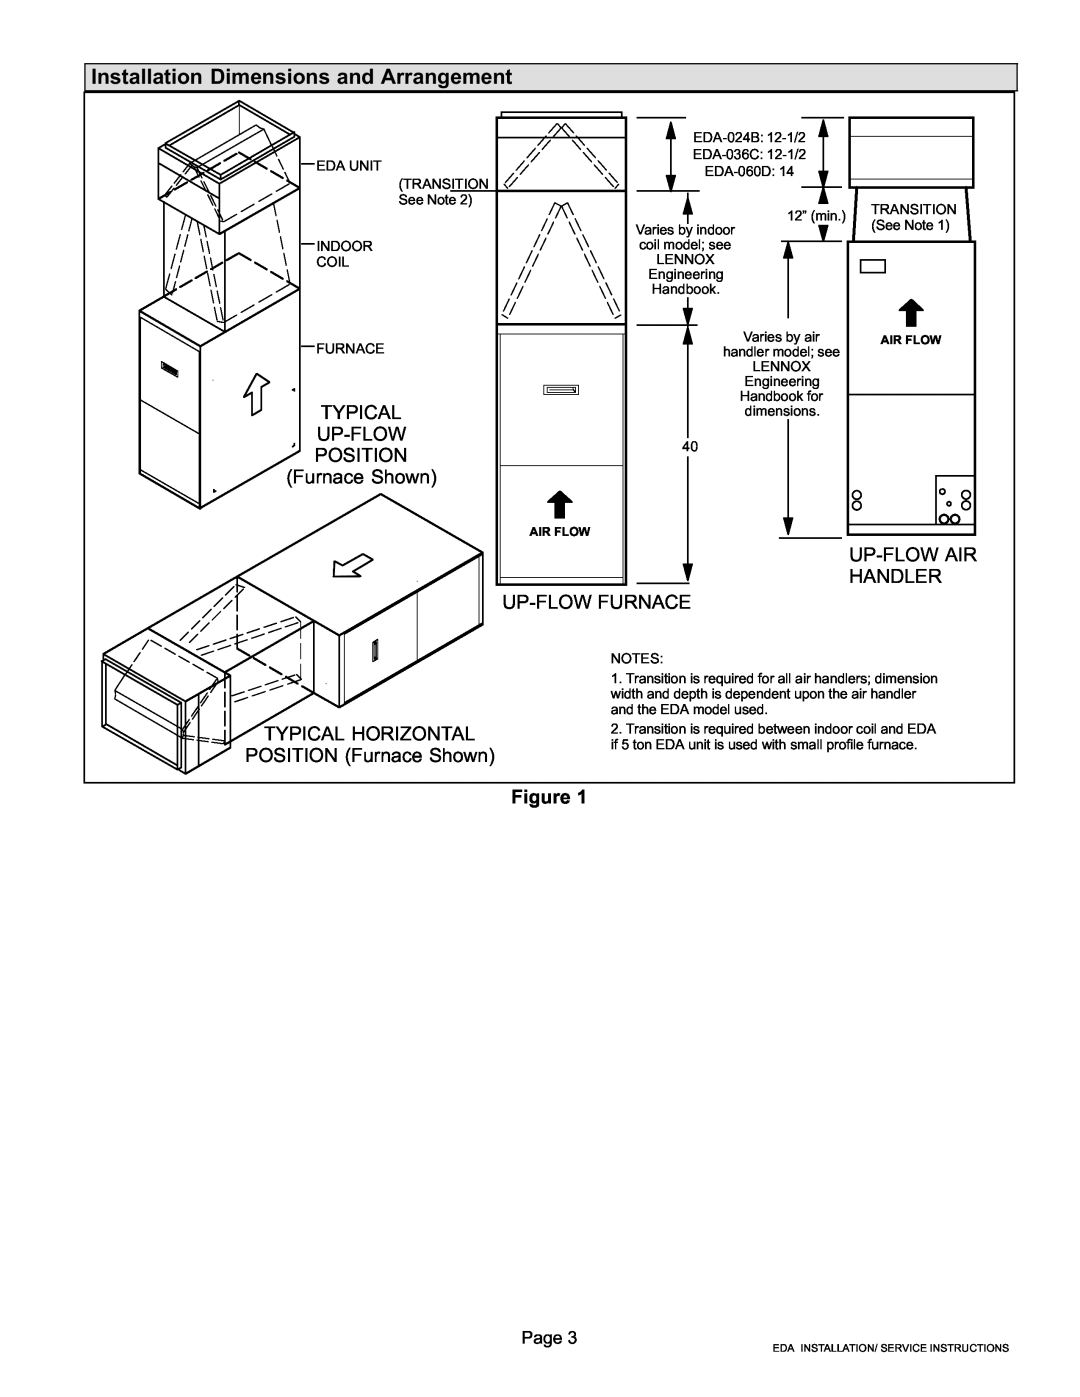 Lennox International Inc 021, 505 Installation Dimensions and Arrangement, TYPICAL UP−FLOW POSITION Furnace Shown 